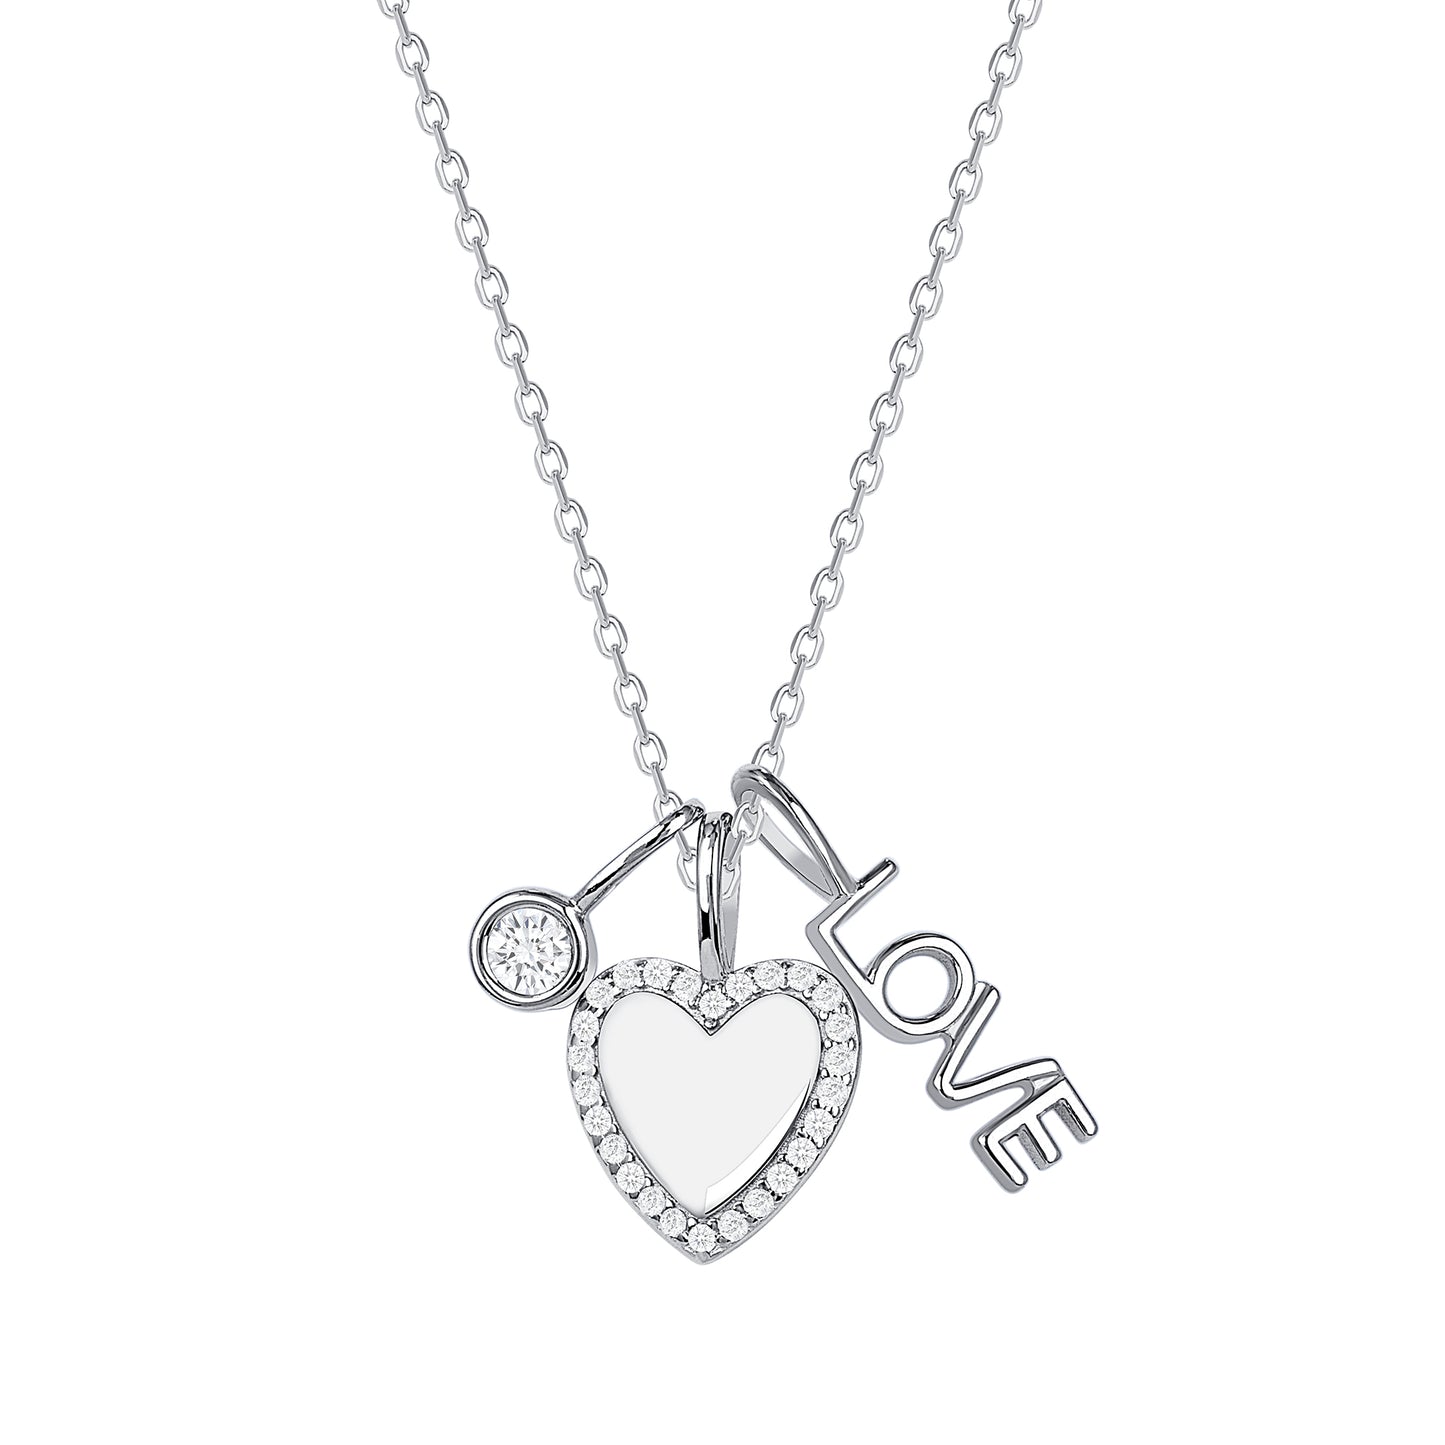 DGN1332. Silver 925 Cubic Zirconia Heart and Love Necklace